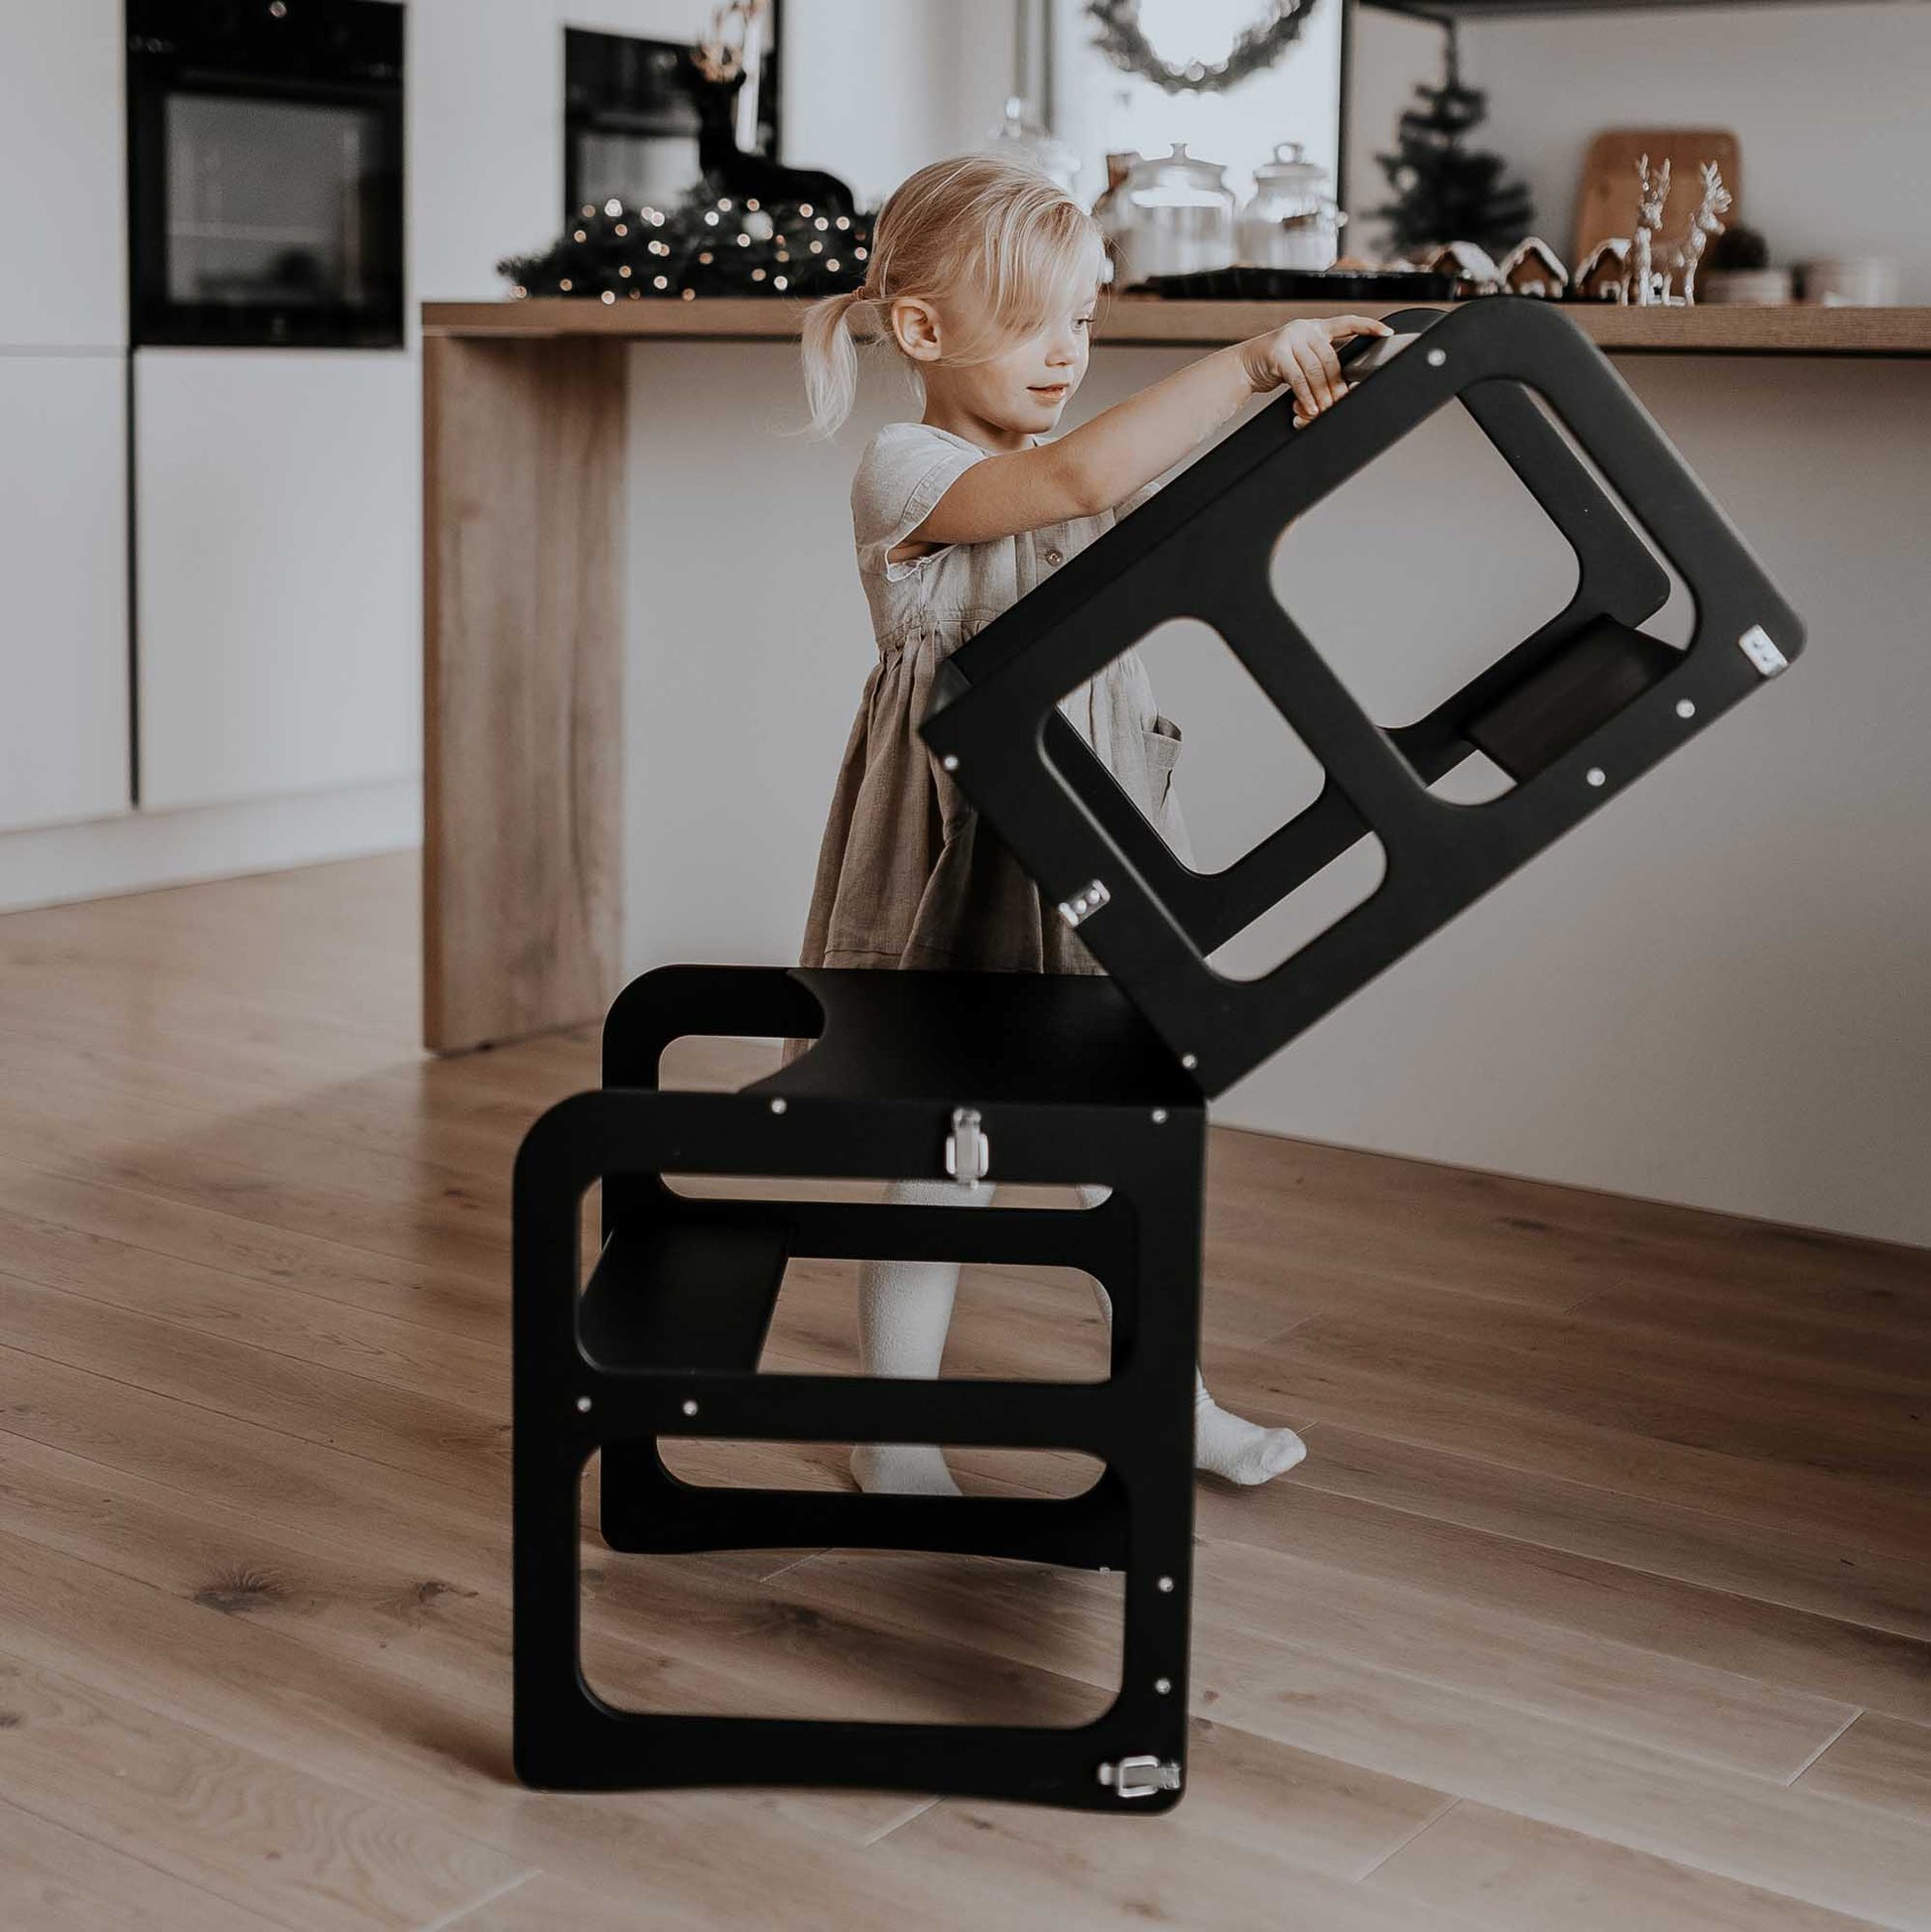 A little girl using a Sweet Home From Wood 2-in-1 transformable kitchen tower - table and chair set in a kitchen.